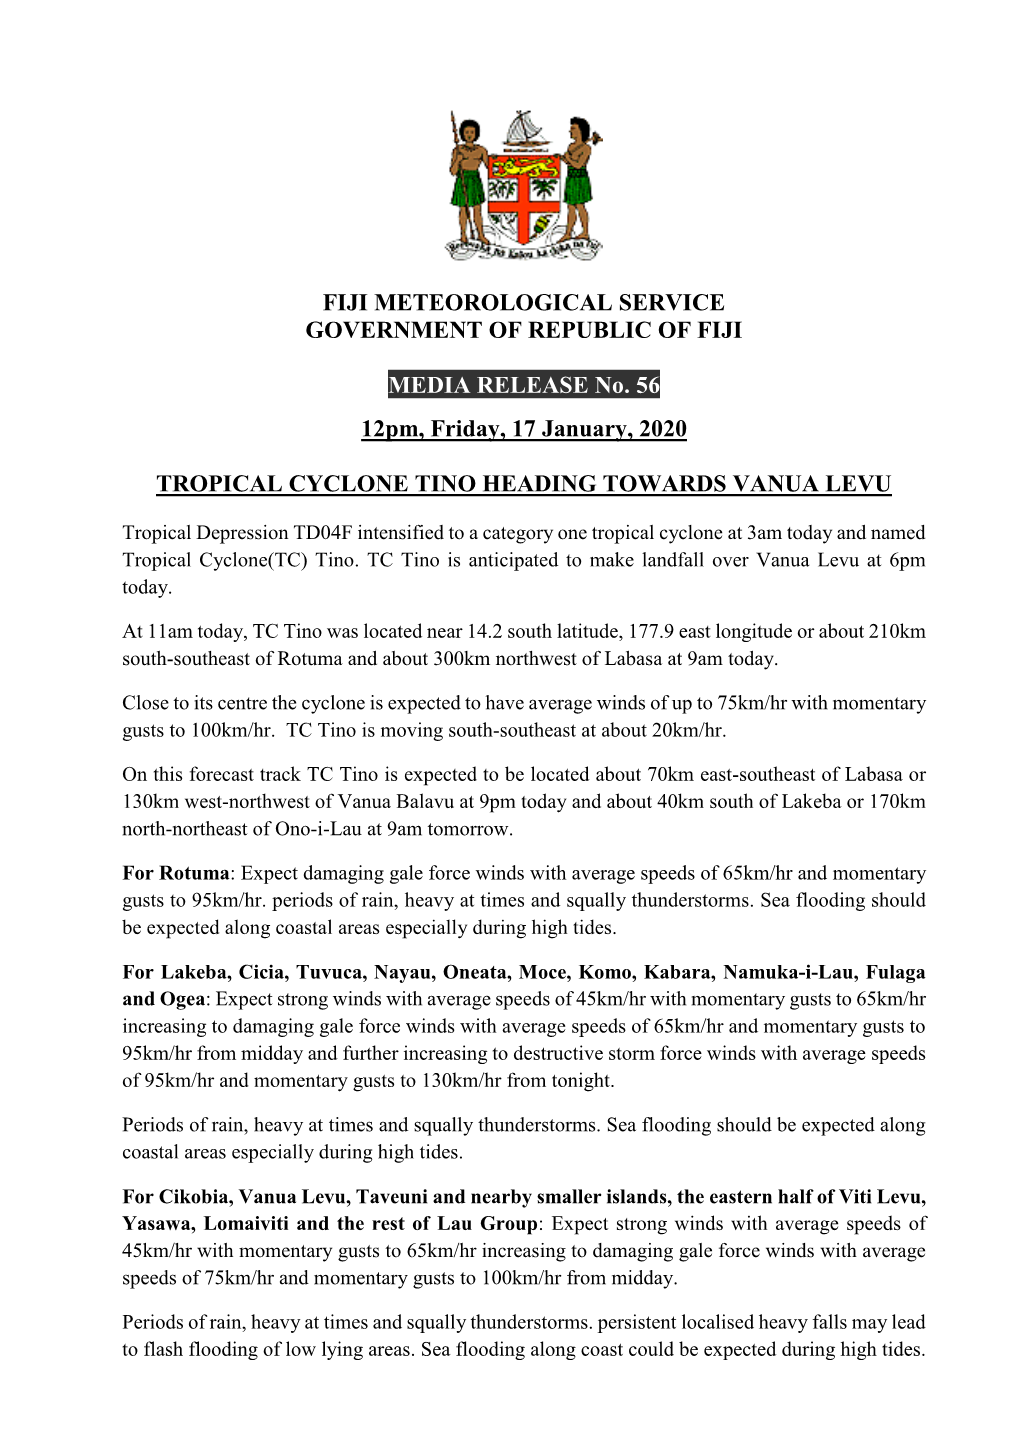 FIJI METEOROLOGICAL SERVICE GOVERNMENT of REPUBLIC of FIJI MEDIA RELEASE No. 56 12Pm, Friday, 17 January, 2020 TROPICAL CYCLONE